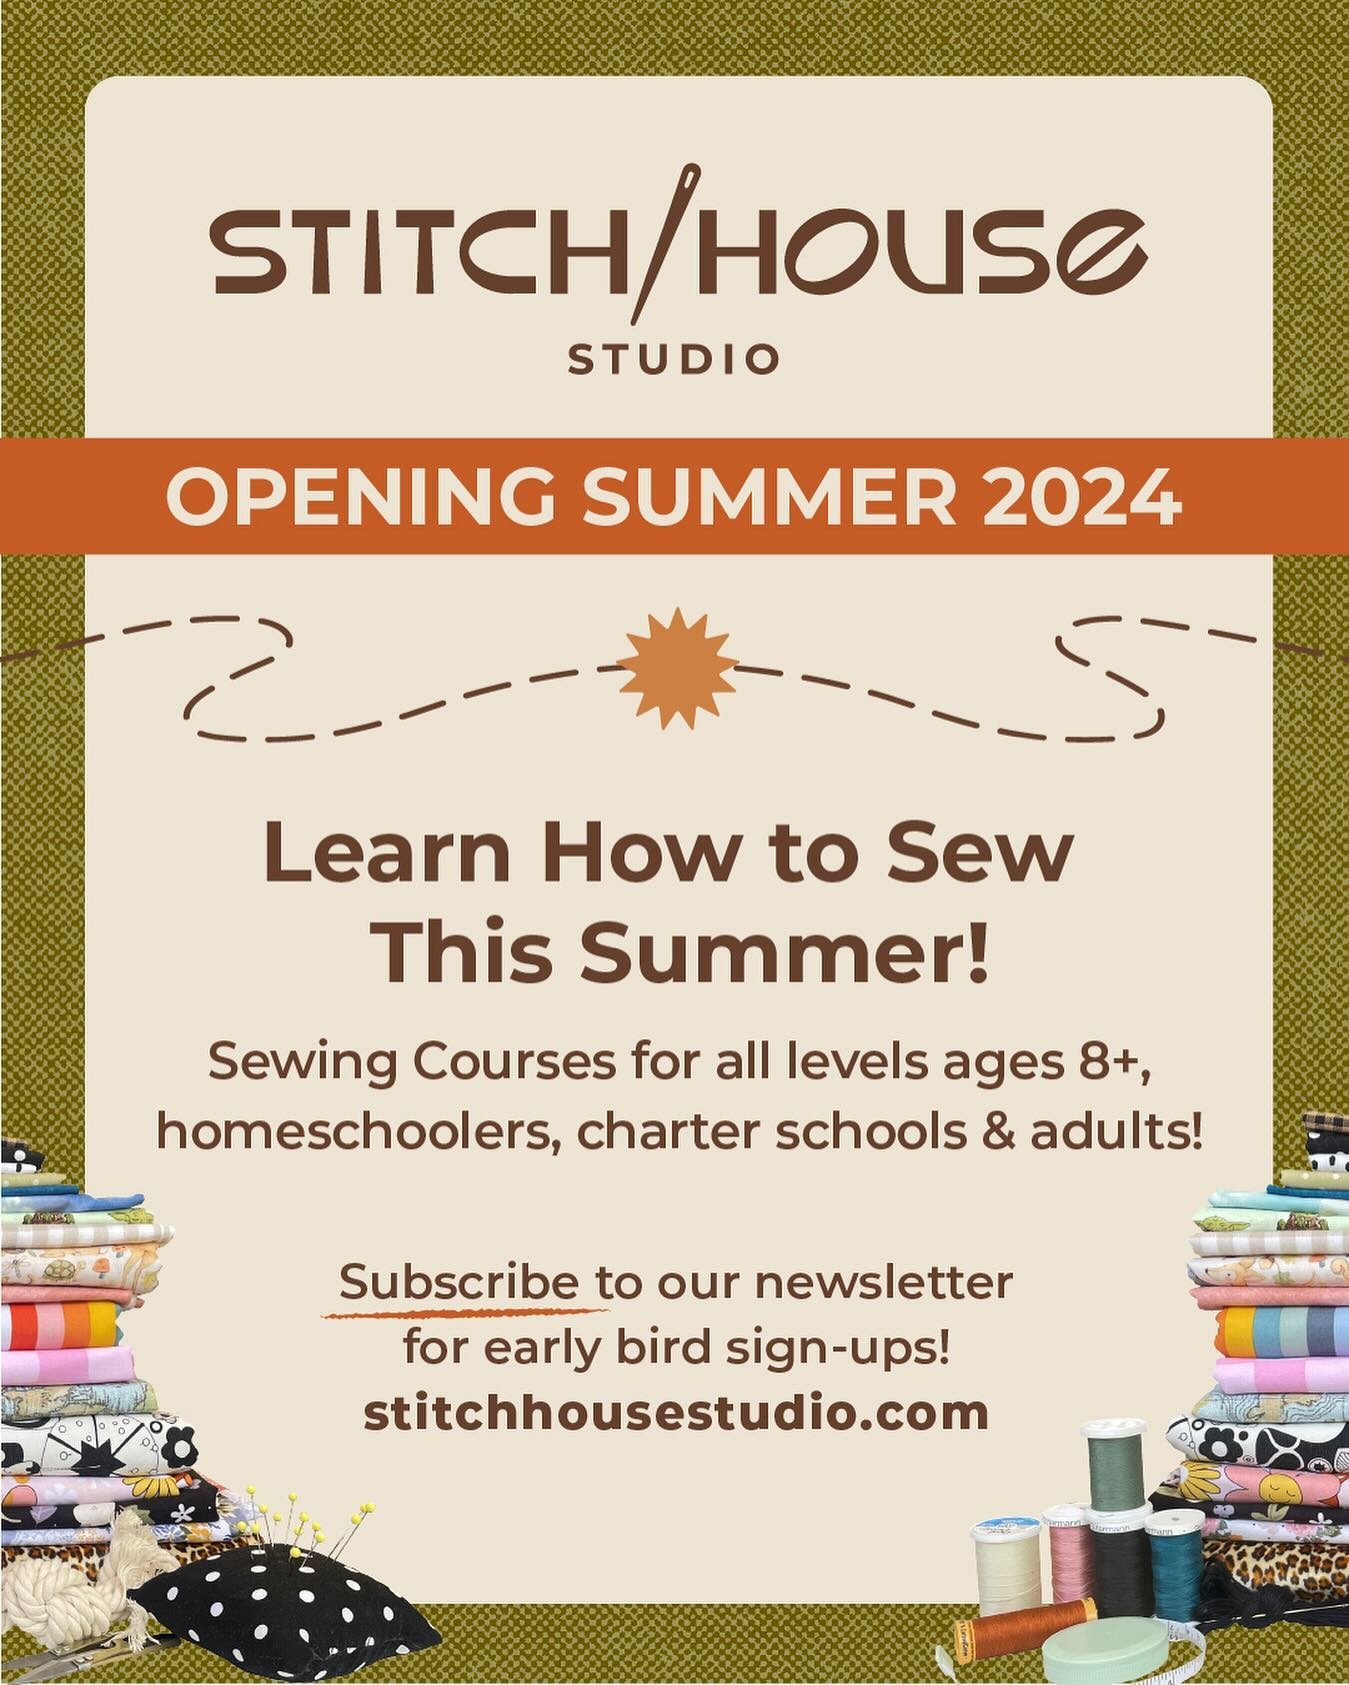 Want to be a part of a fun and creative community this Summer? Stitch House Studio is a great option for a summer sewing course tailored to all ages and skill levels. Our hands on instructors will guide each student through exciting sewing projects w